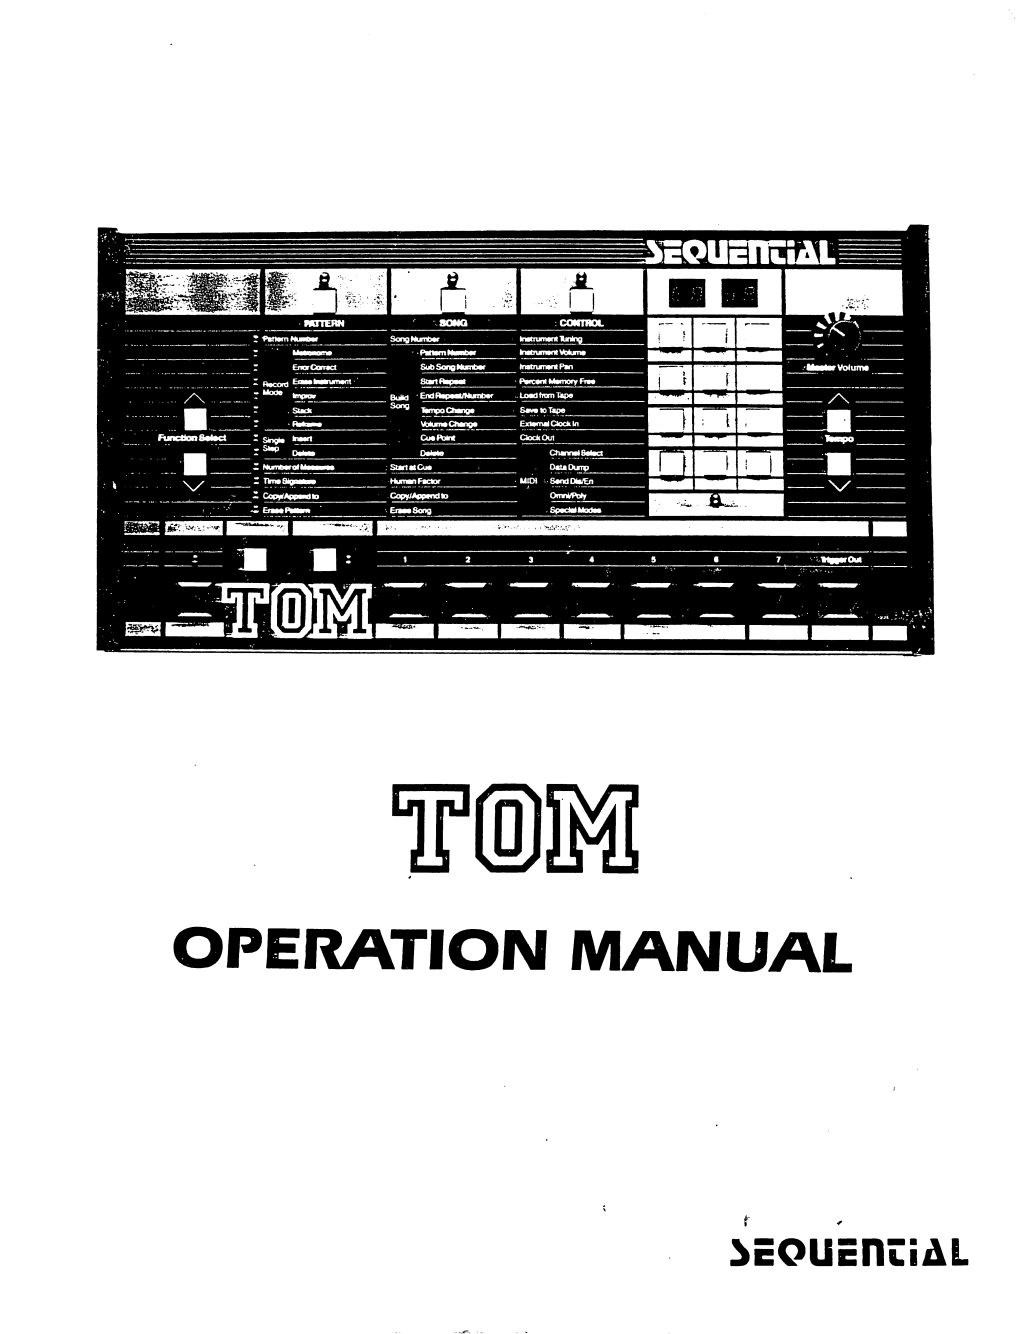 OPERATION MANUAL SEQUENTIAL CM120A Publications Department March, 1985